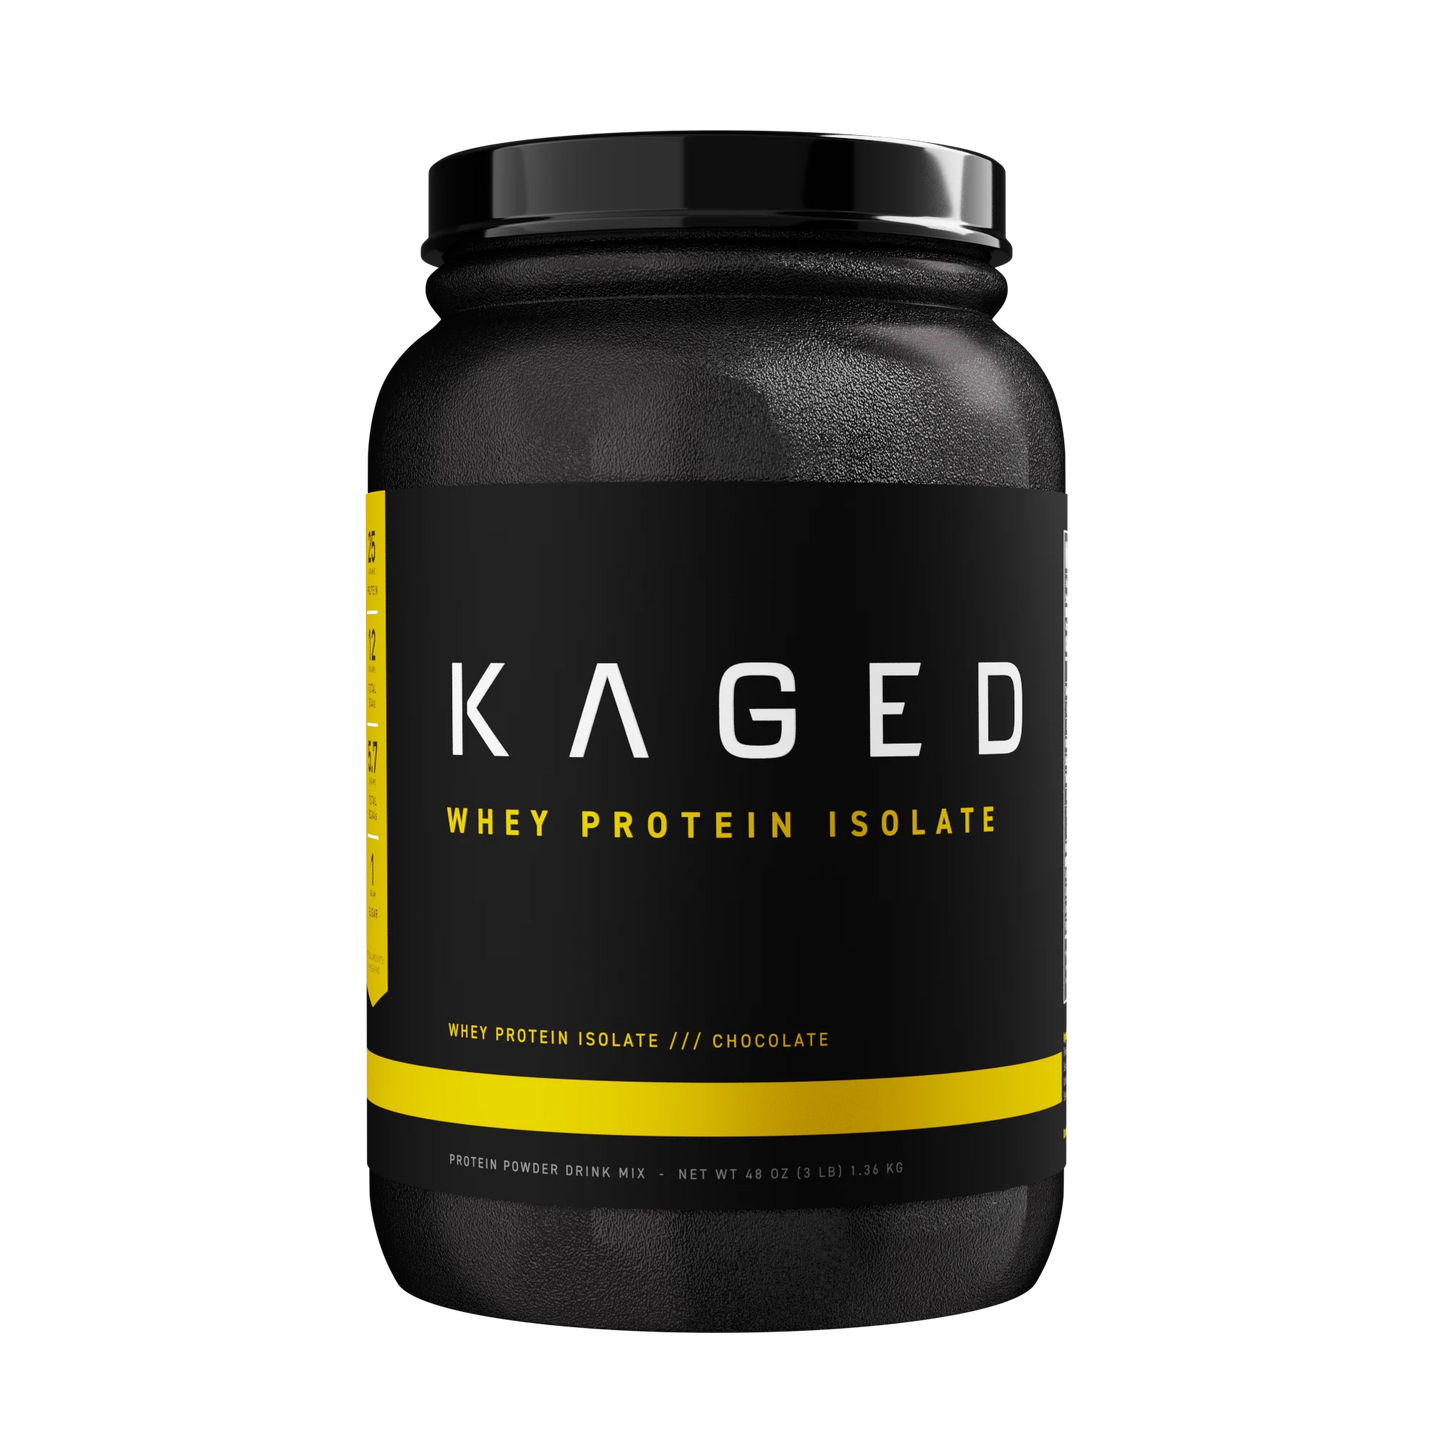 KAGED Whey Protein Isolate